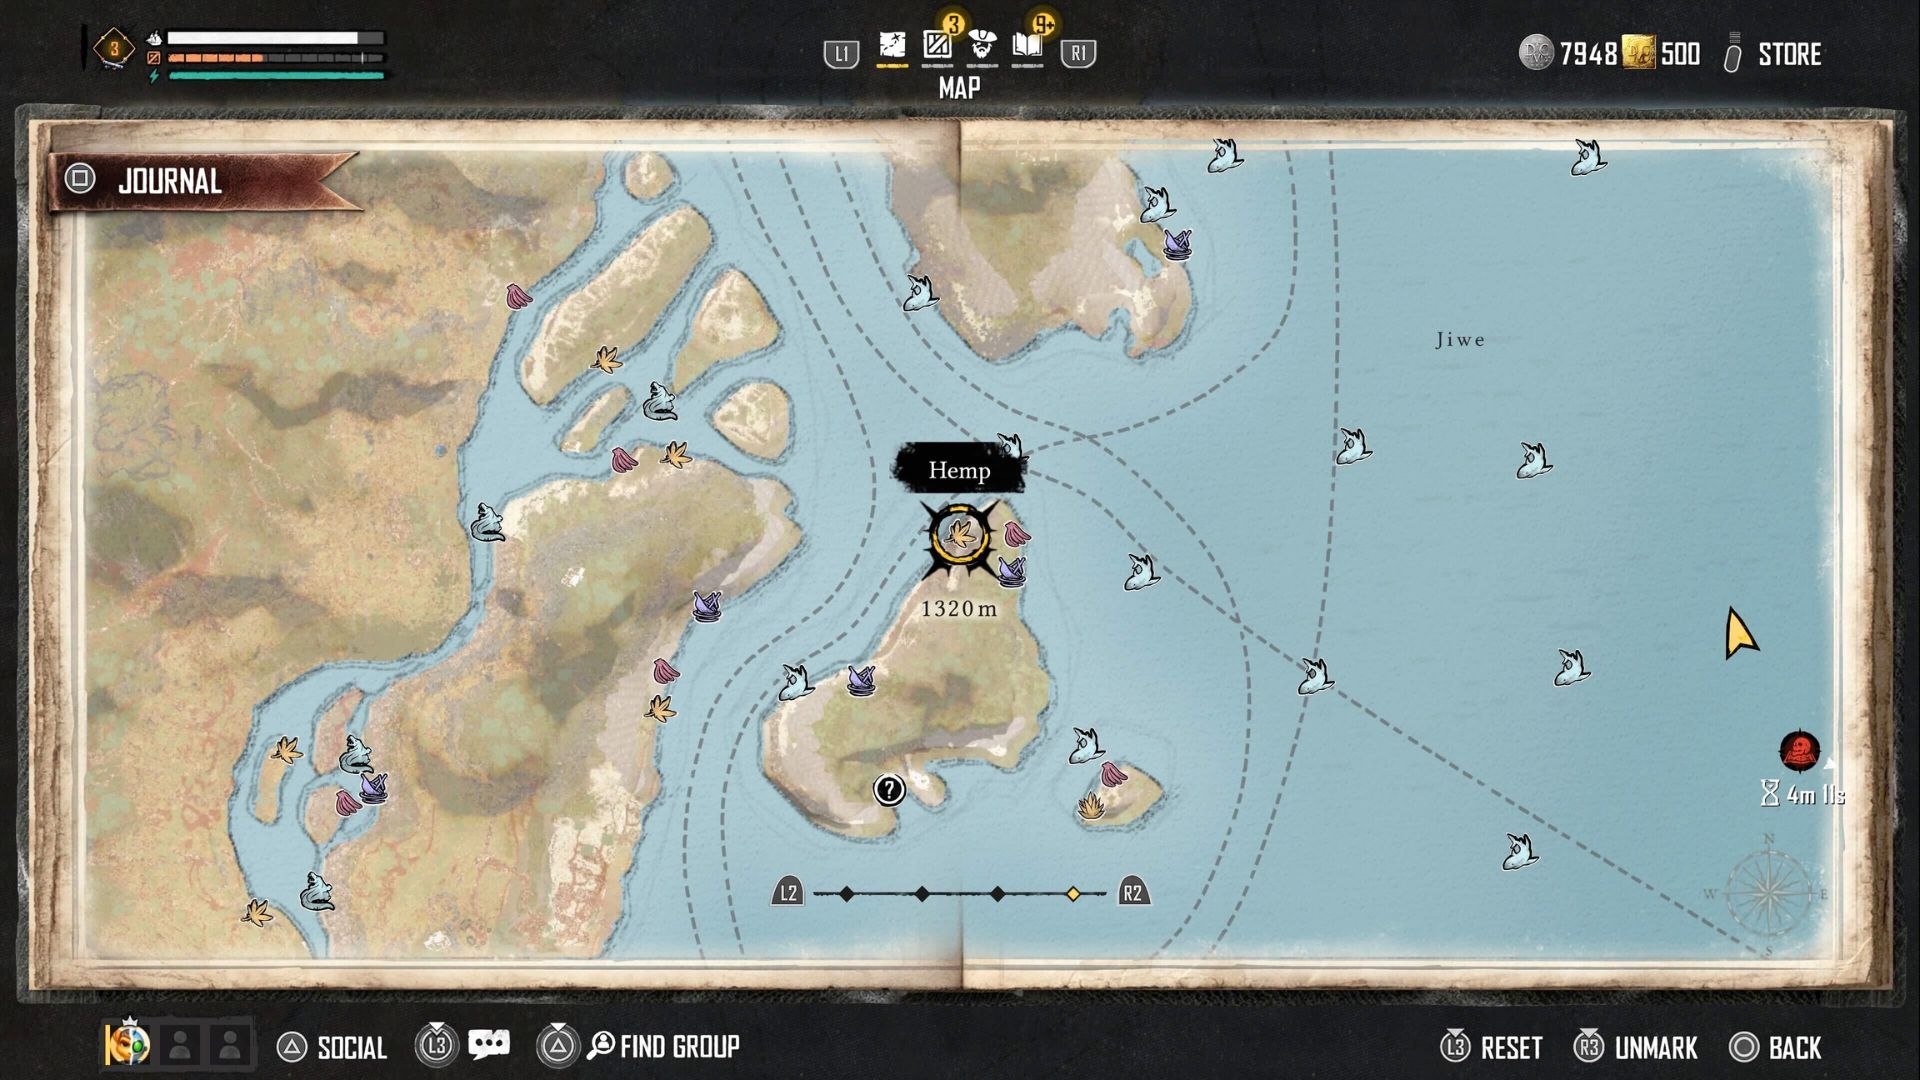 An image of the map in Skull and Bones with the cursor highlighting the location of Hemp